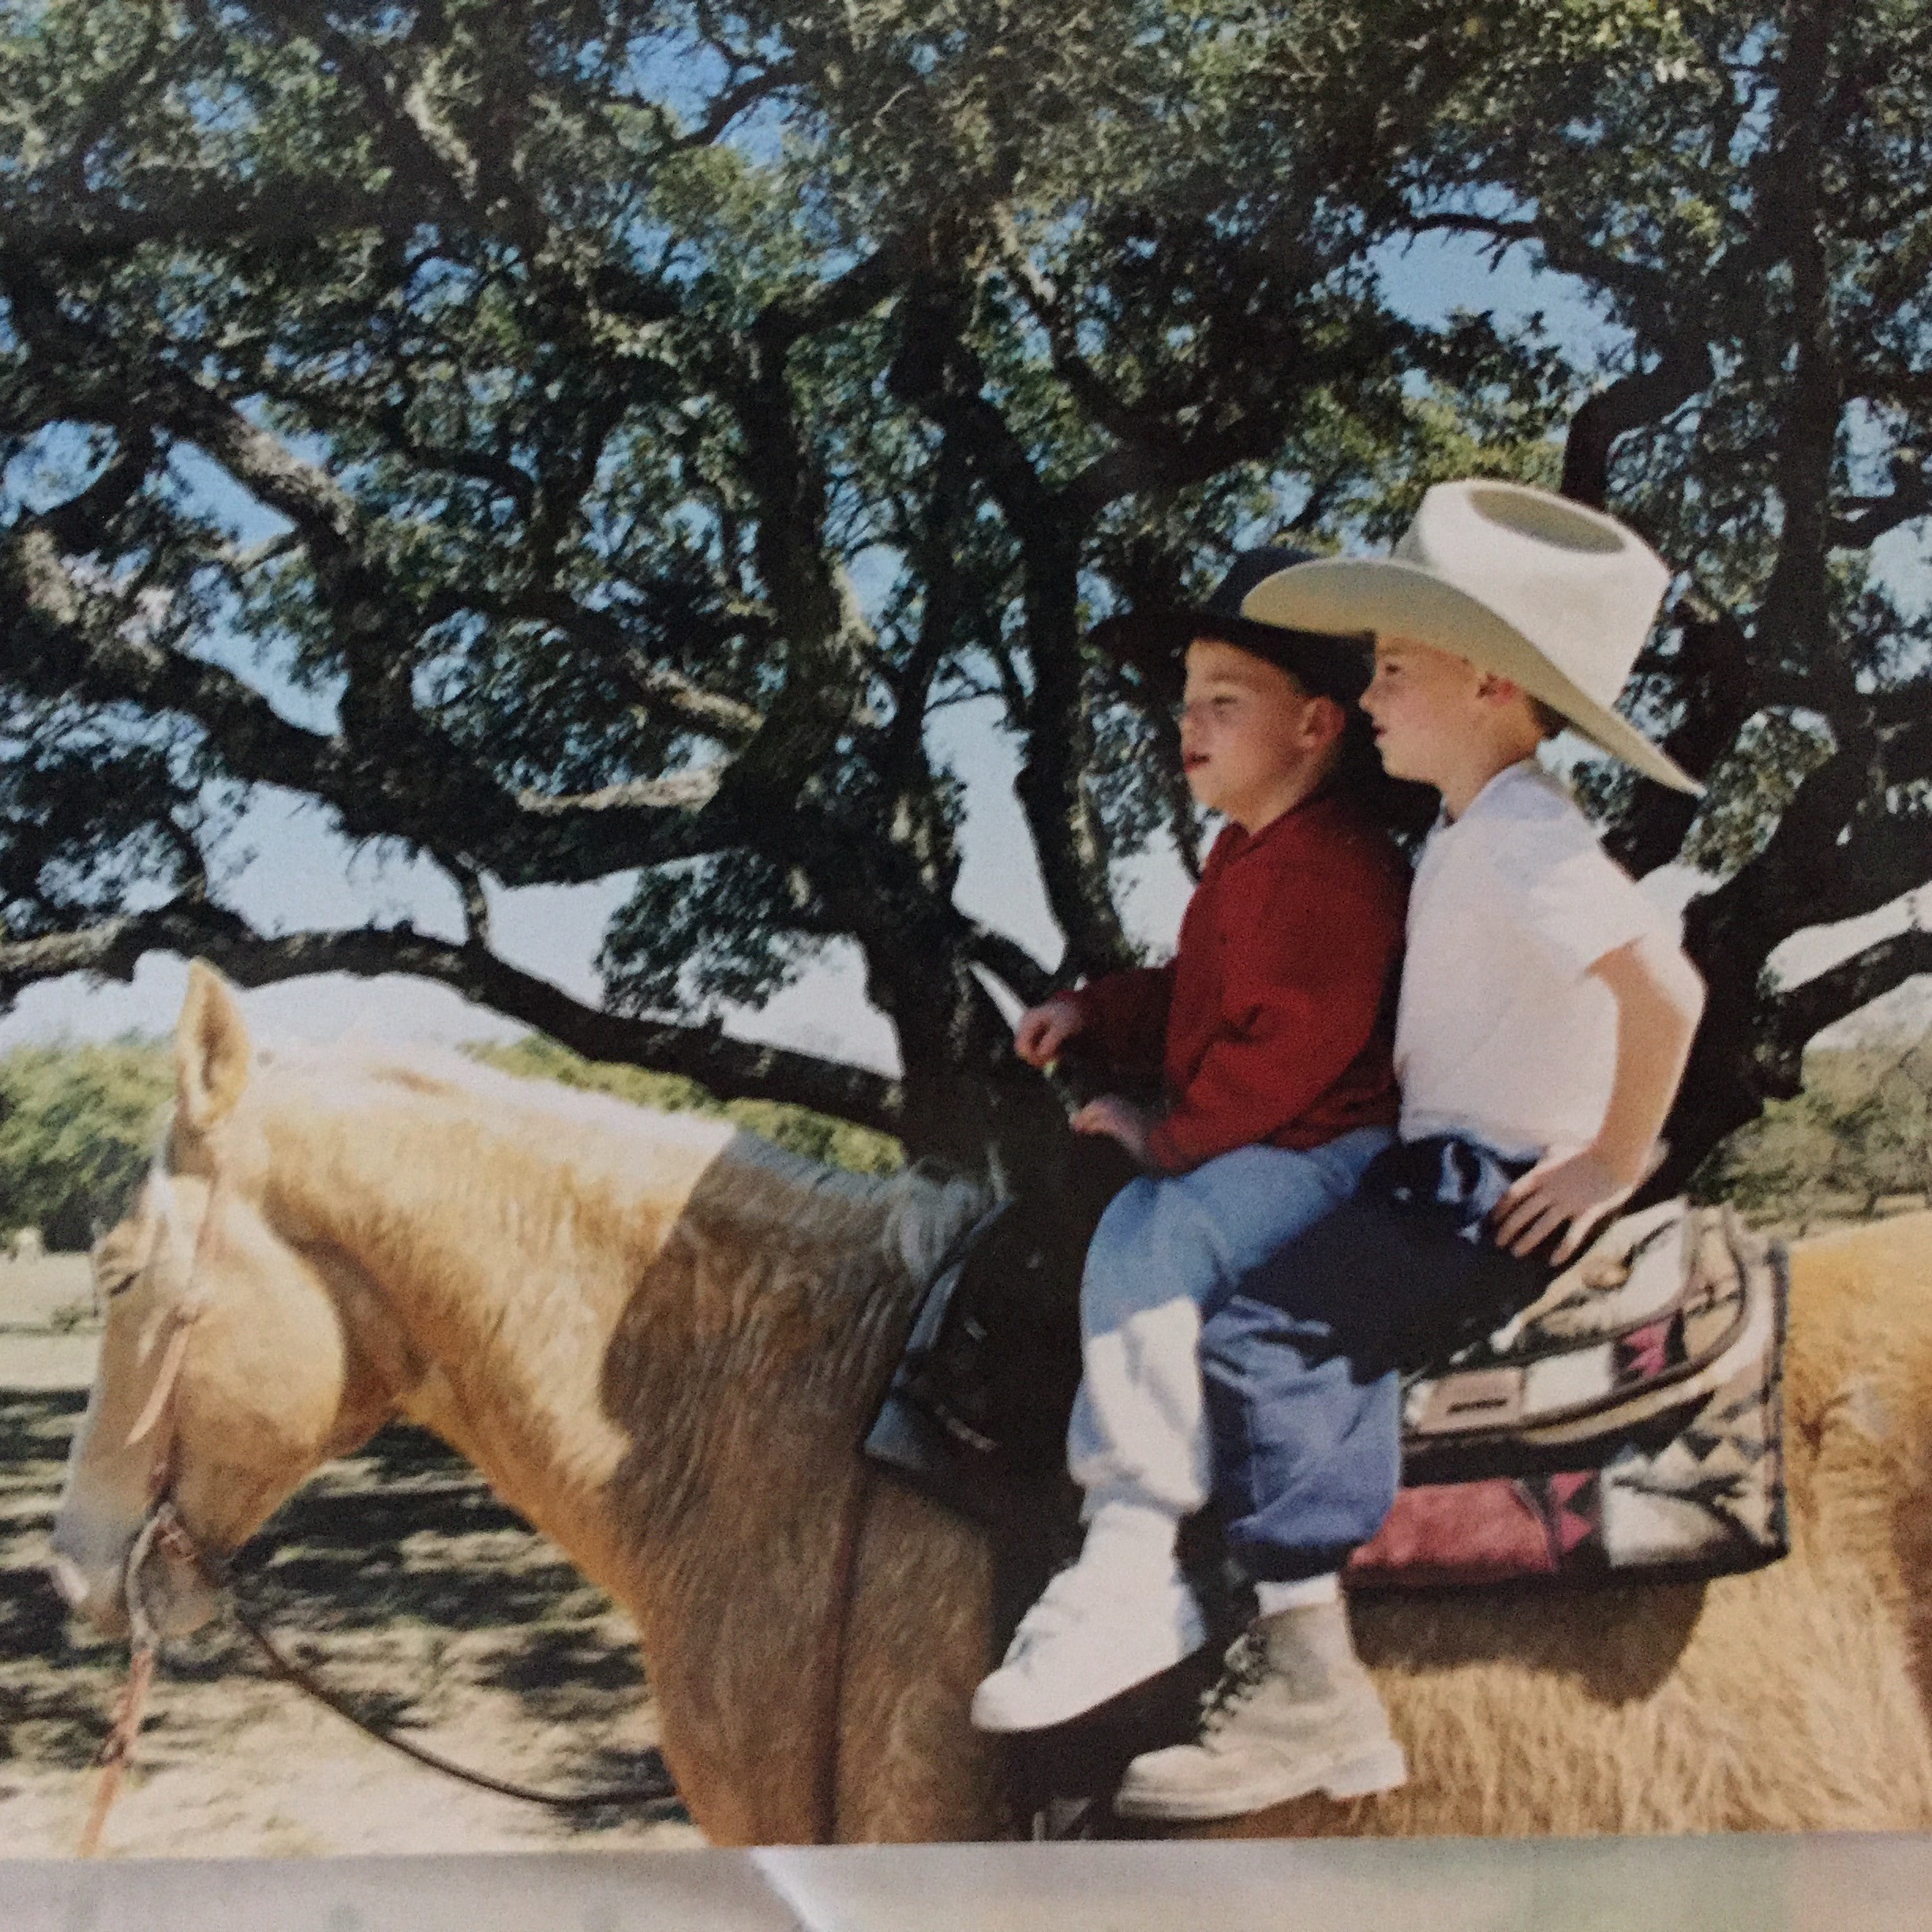 two little kids riding a horse